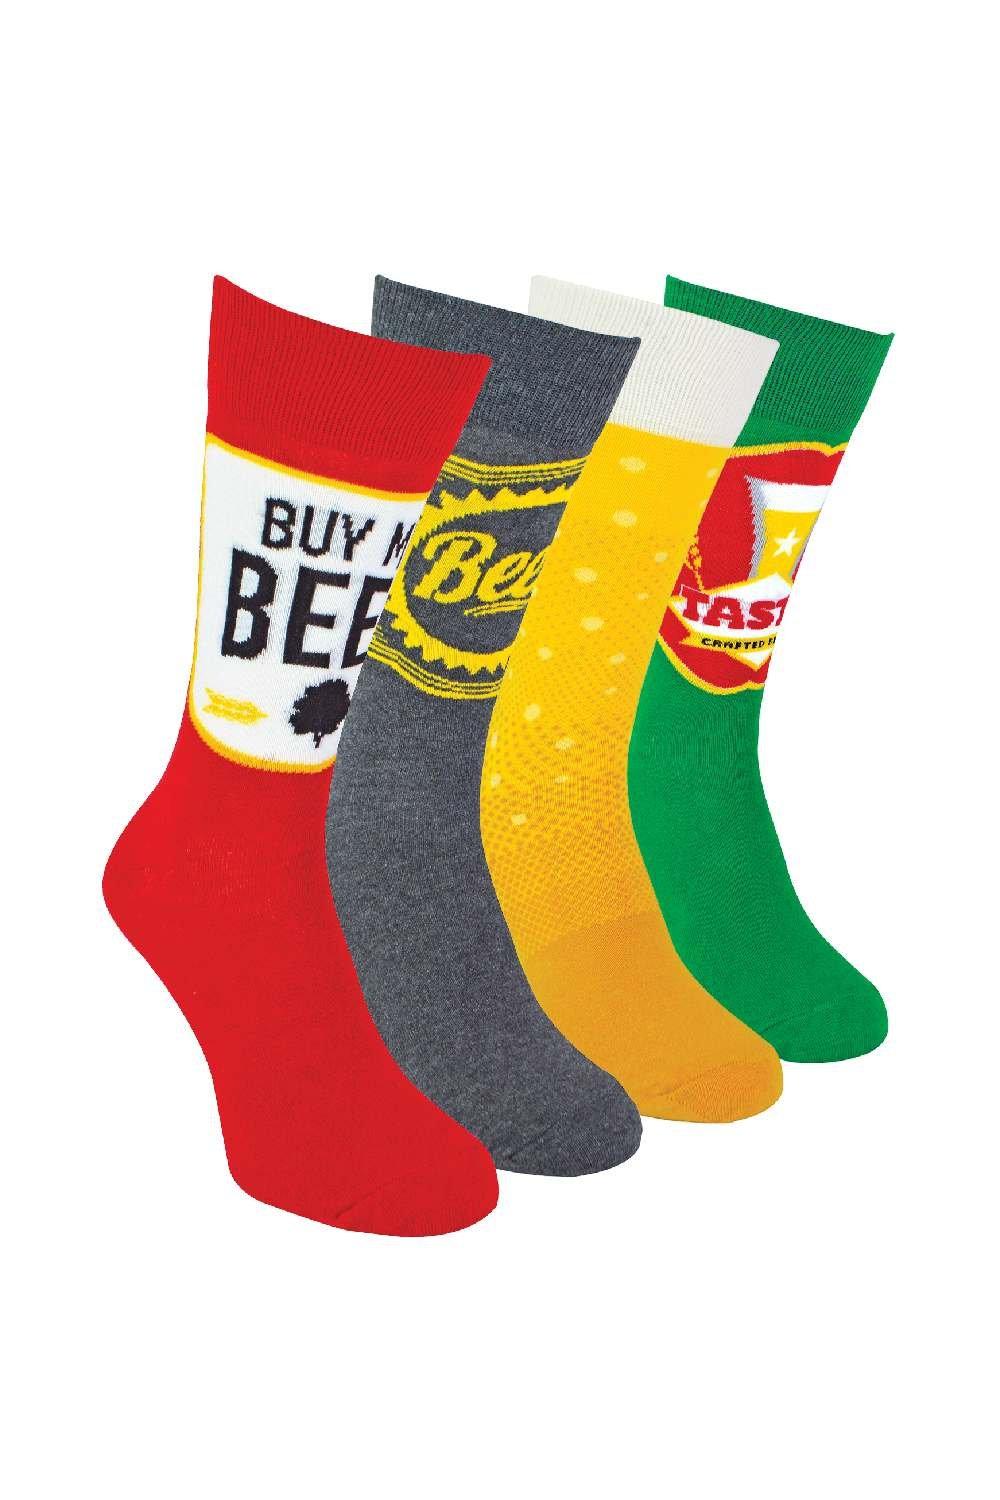 4 Pairs Novelty Soft Cotton Beer Socks in a Gift Box